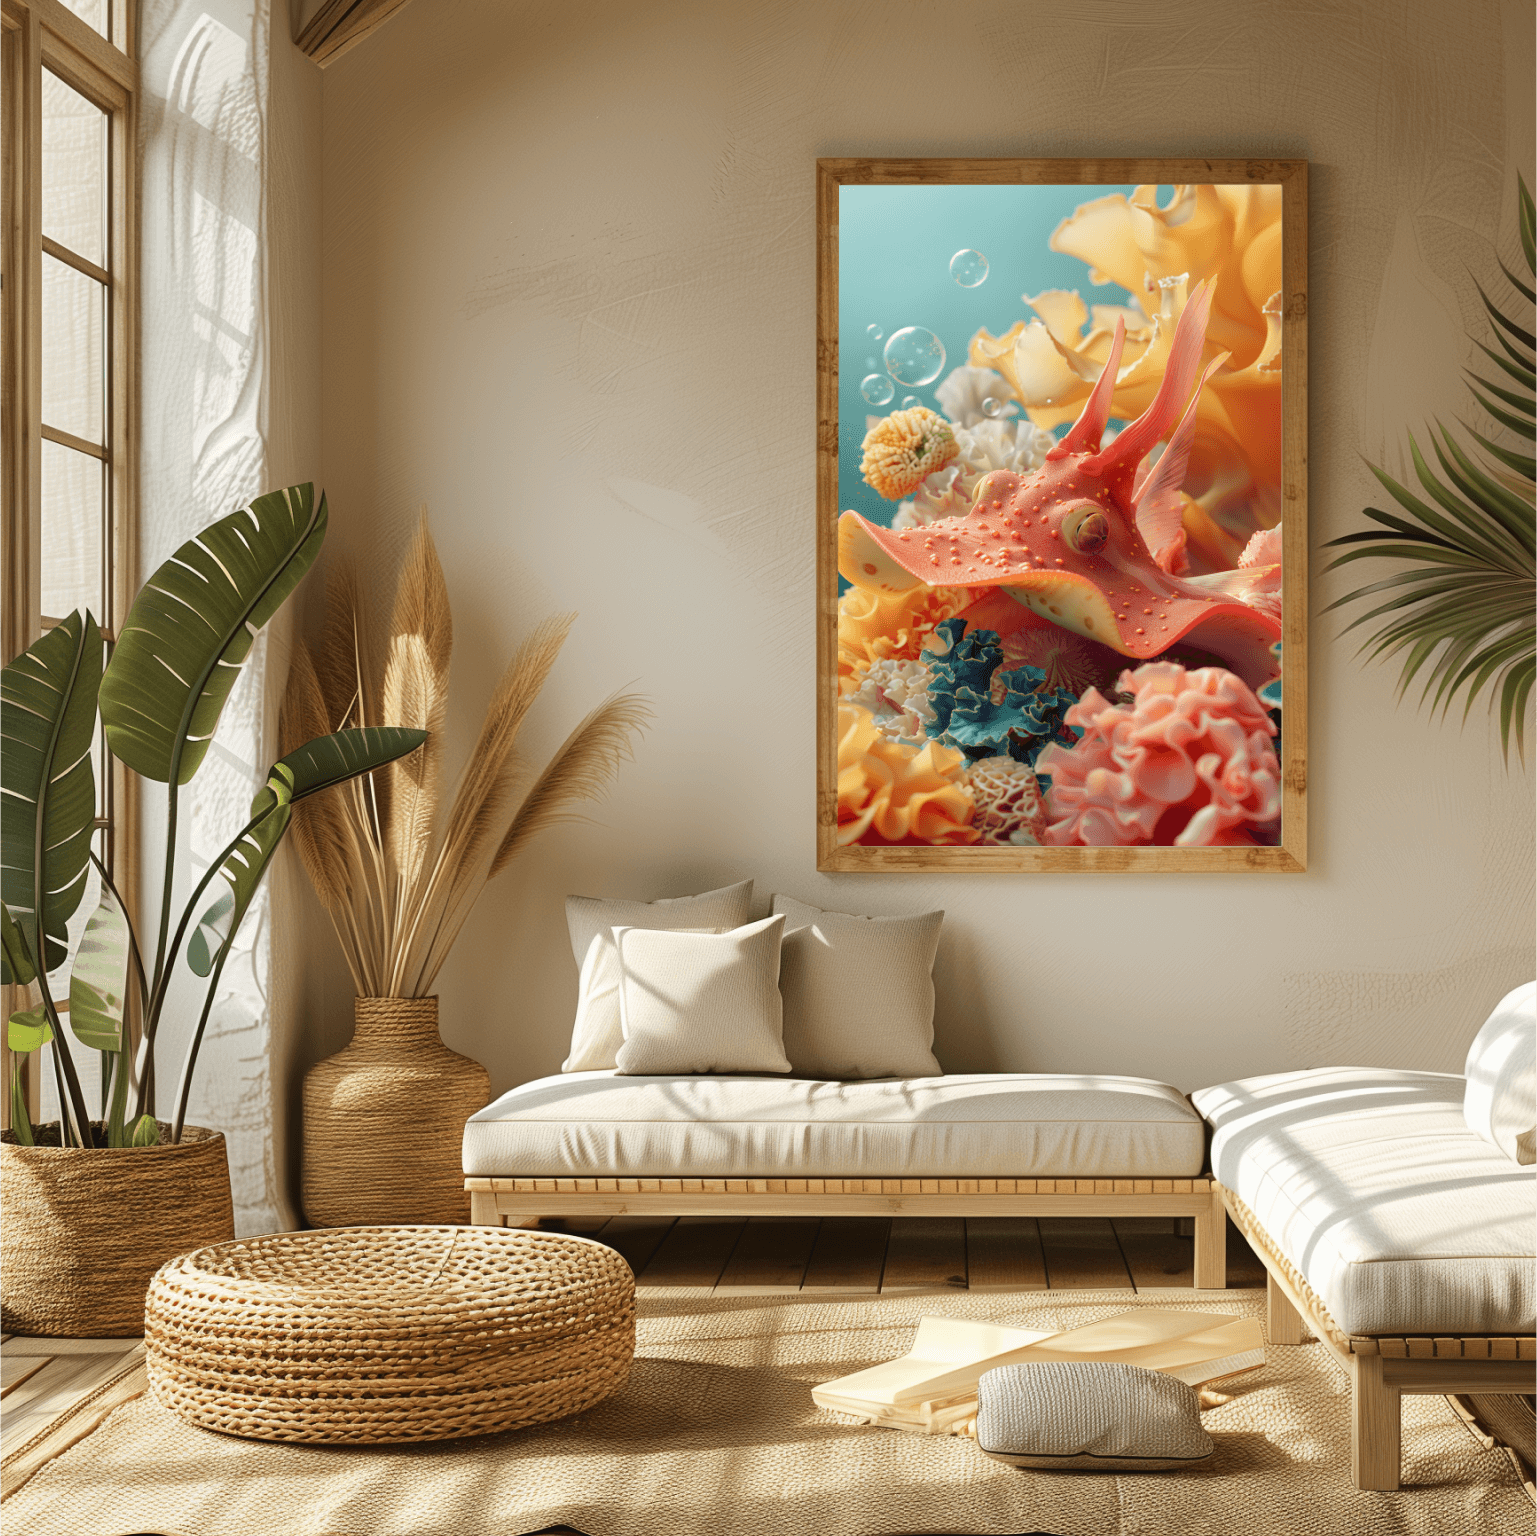 A framed poster of a stingray swimming in a coral reef.